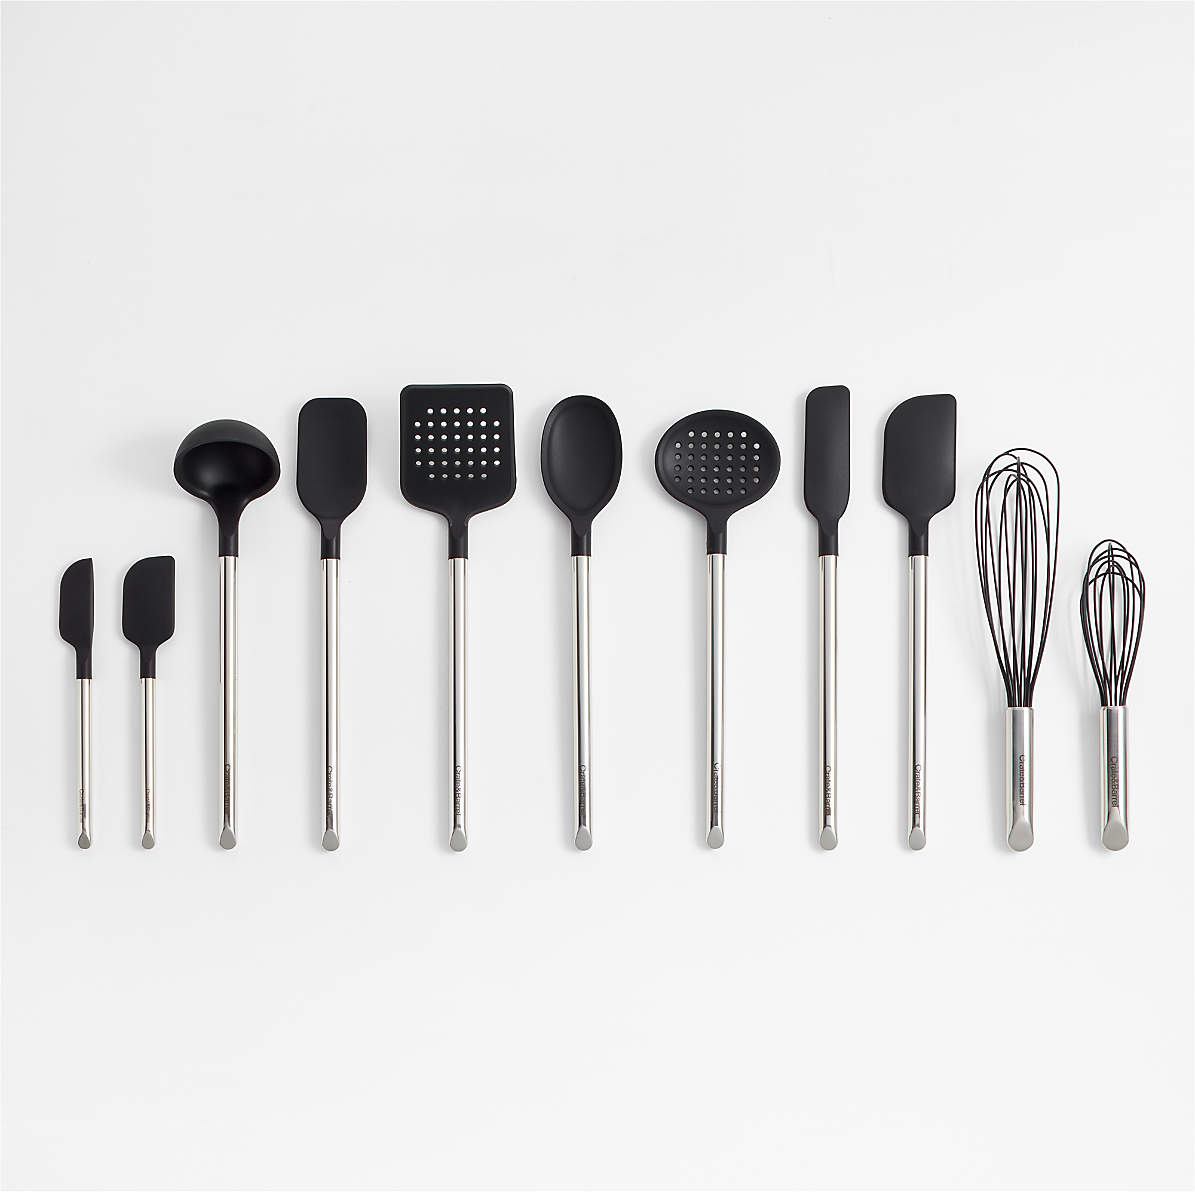 OXO - The OXO Small Silicone Spatula is ideal for small bowls and mixers!  This heat resistant (up to 600 F) Spatula is also dishwasher safe and safe  for non-stick cookware and